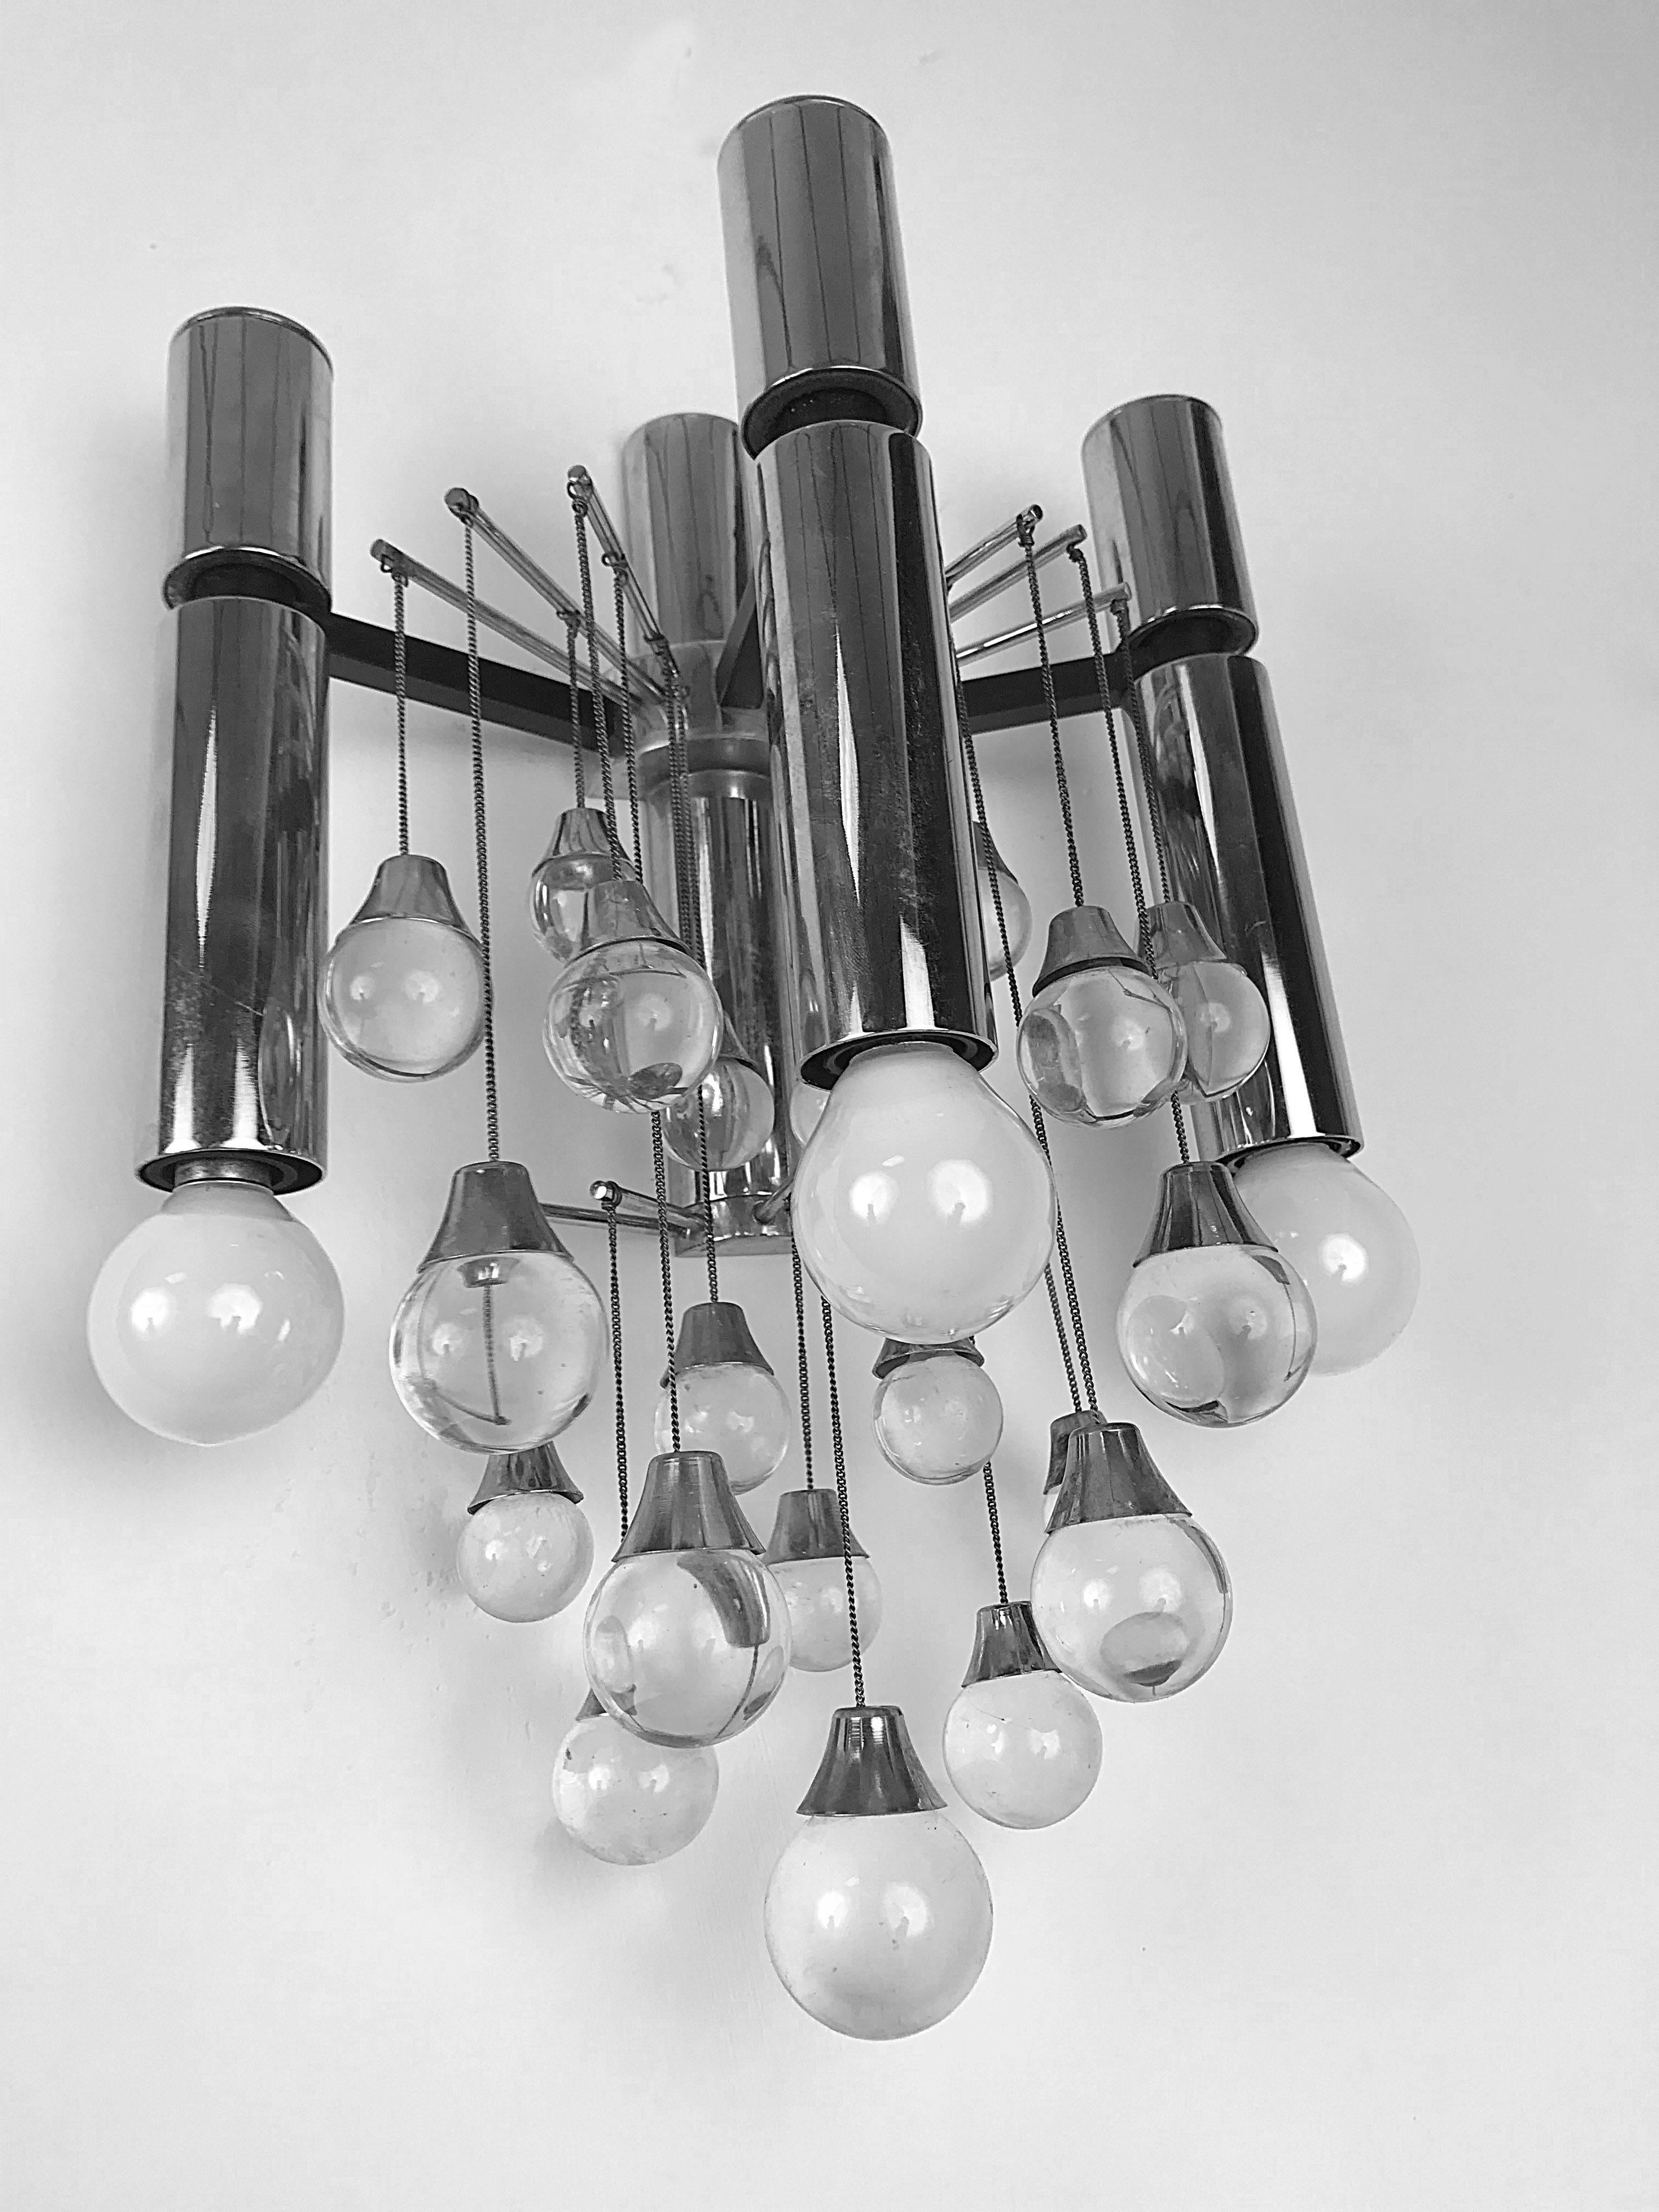 Pair of Sciolari Chrome and Glass Italian Sconces with Three Lights, 1960s For Sale 5